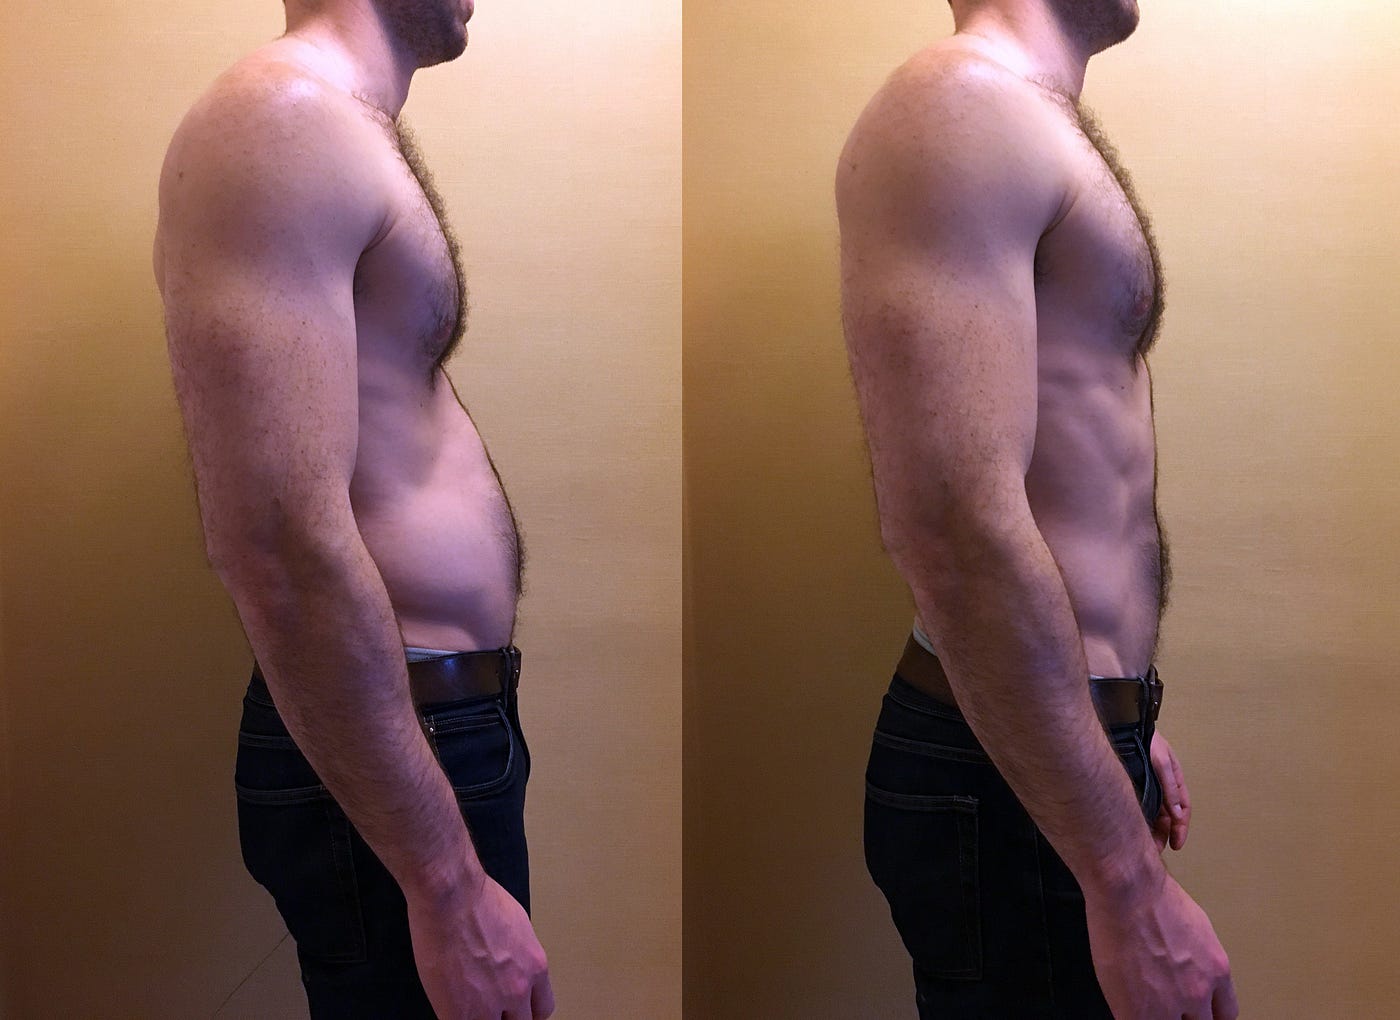 Lordosis on the left, normal curvature on the right. 